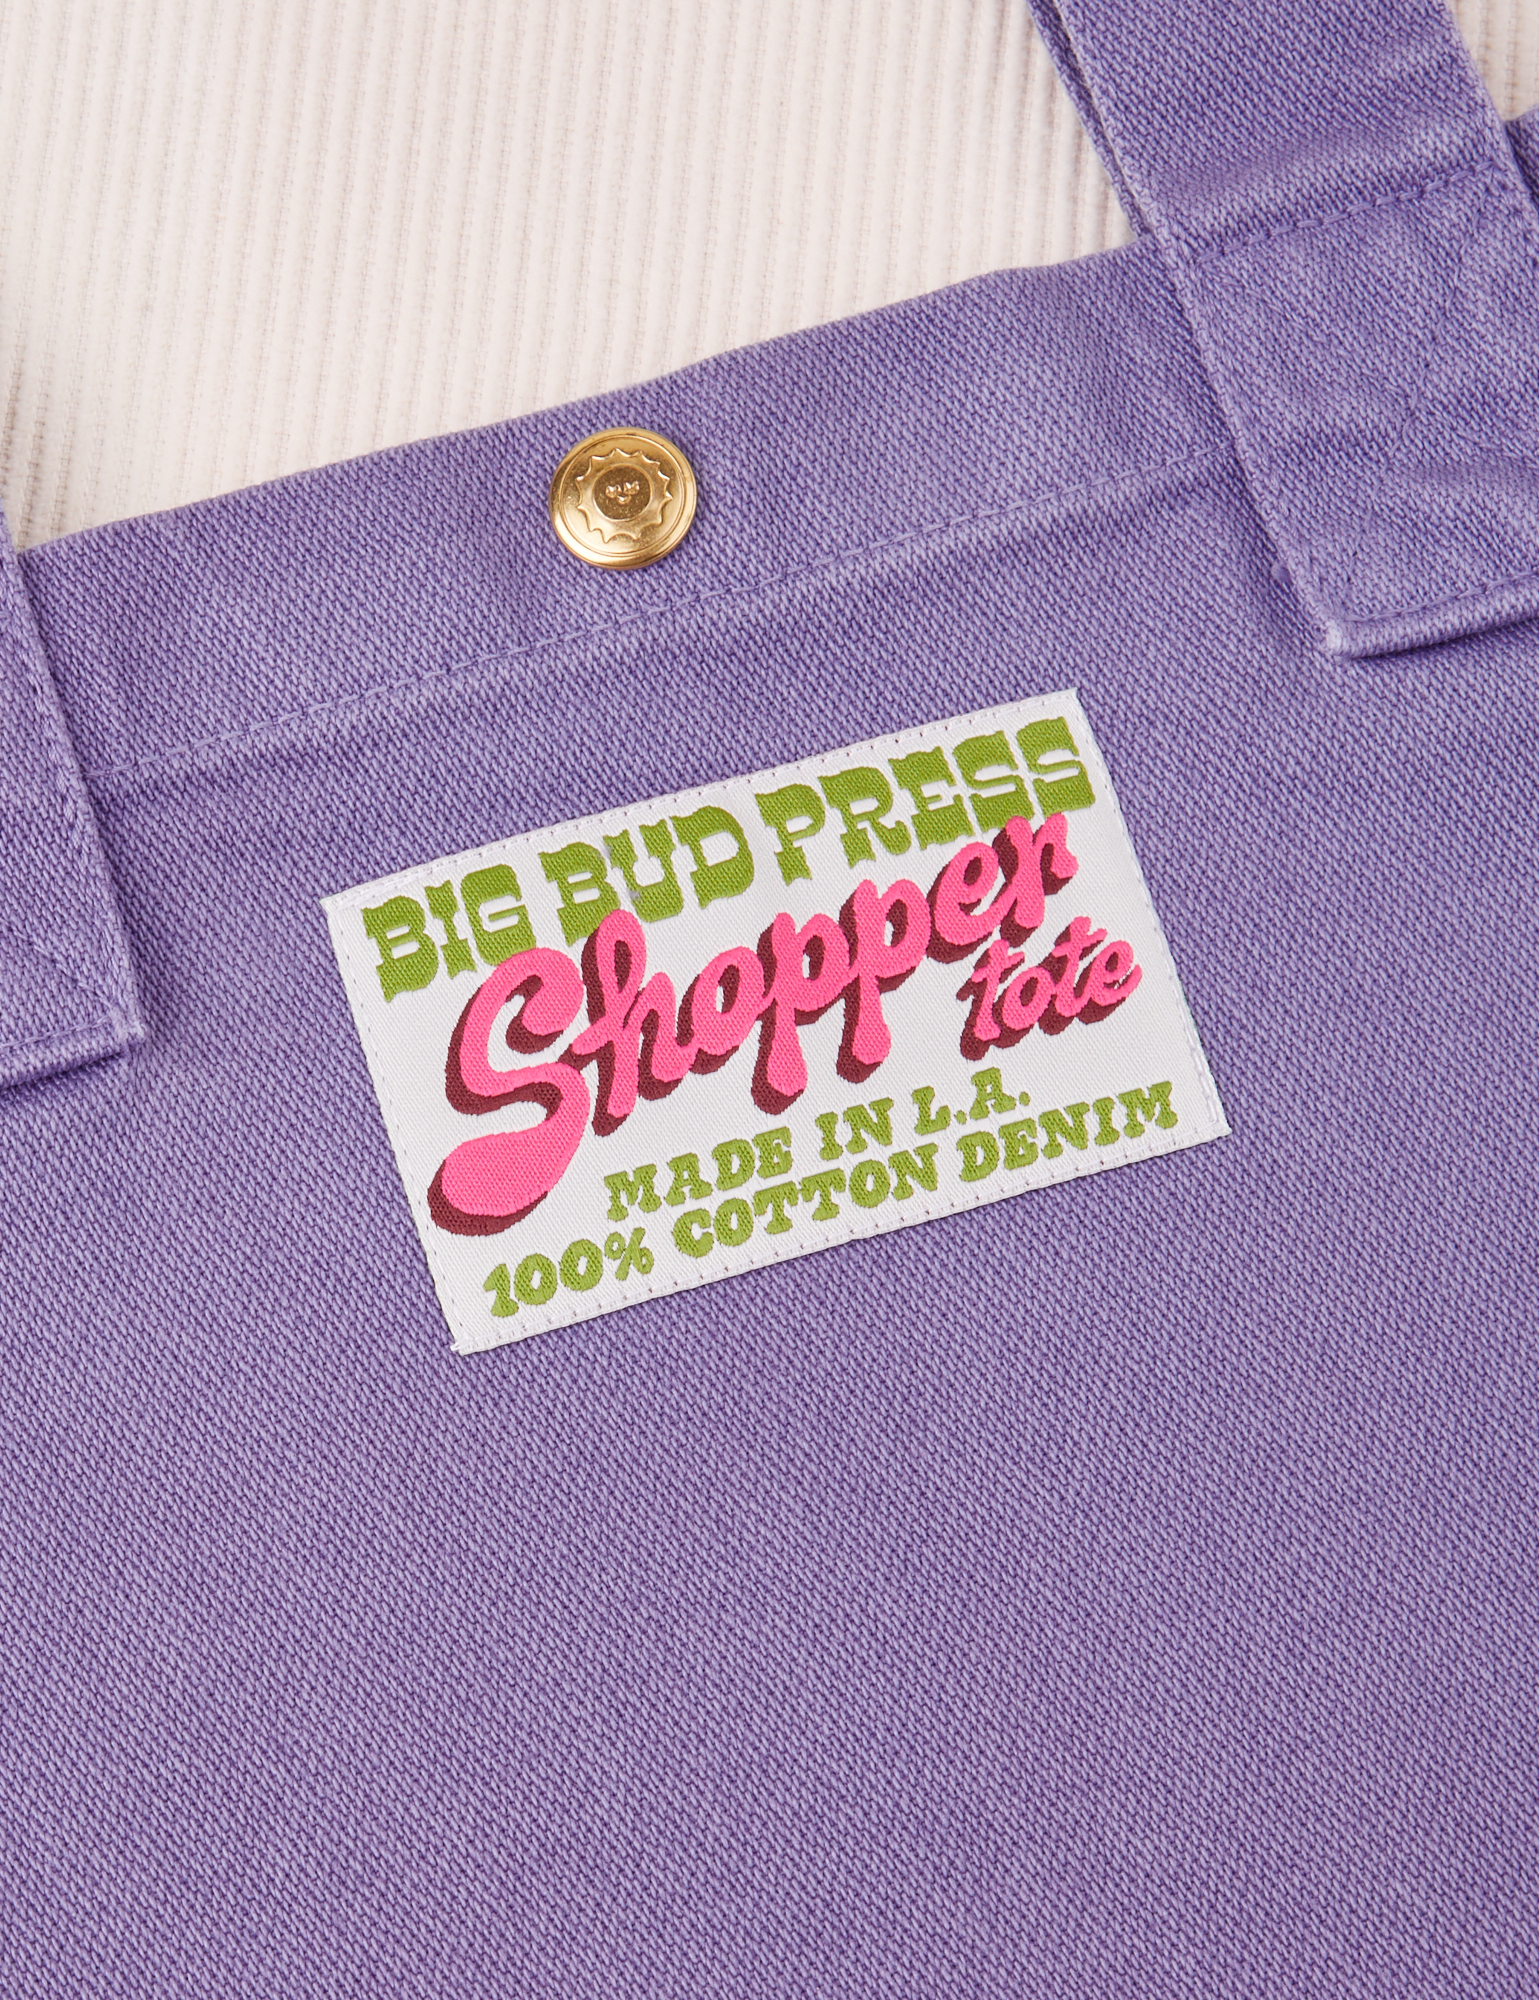 Sun Baby brass snap on Shopper Tote Bag in Faded Grape. Bag label in green and pink text that reads &quot;Big Bud Press Shopper Tote, Made in L.A., 100% Cotton Denim&quot; on a white background